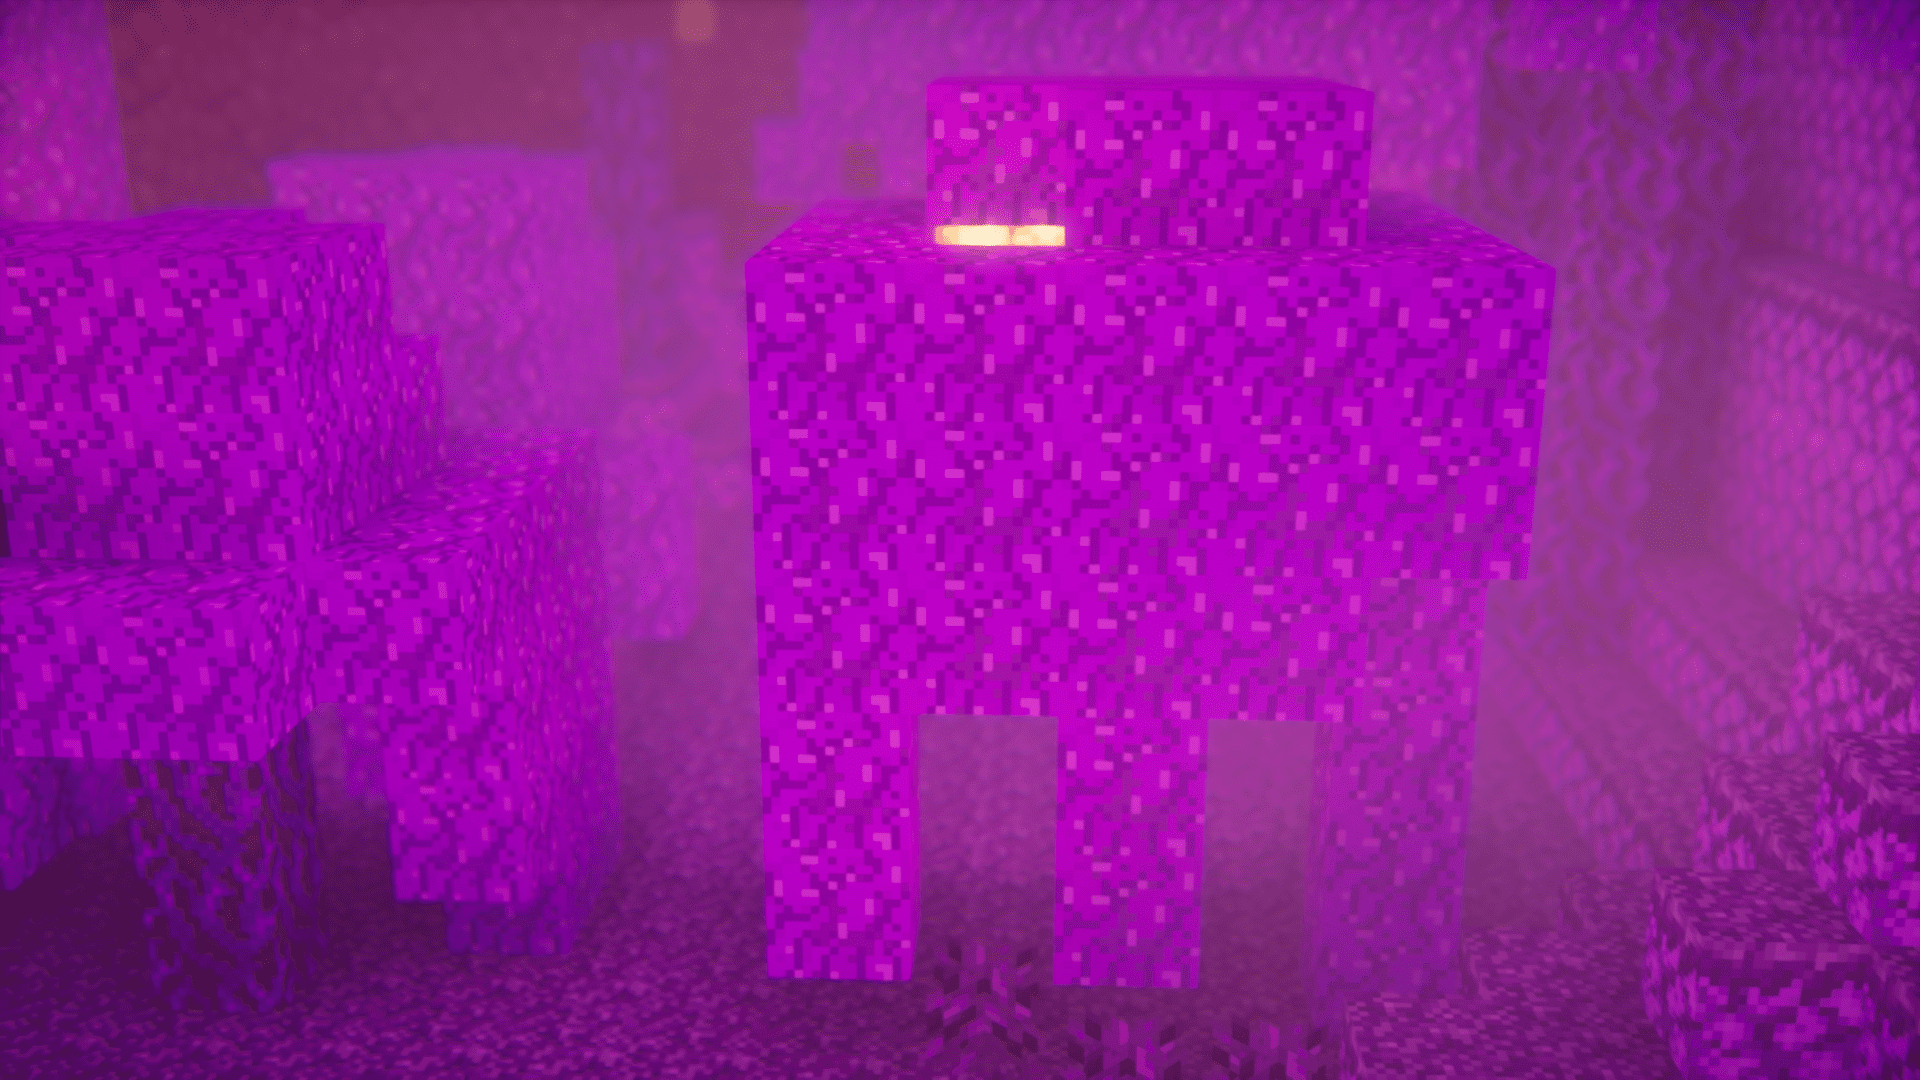 Nether Update Expanded Mod (1.20.1, 1.19.4) - Improvements & Additions To The Nether 2